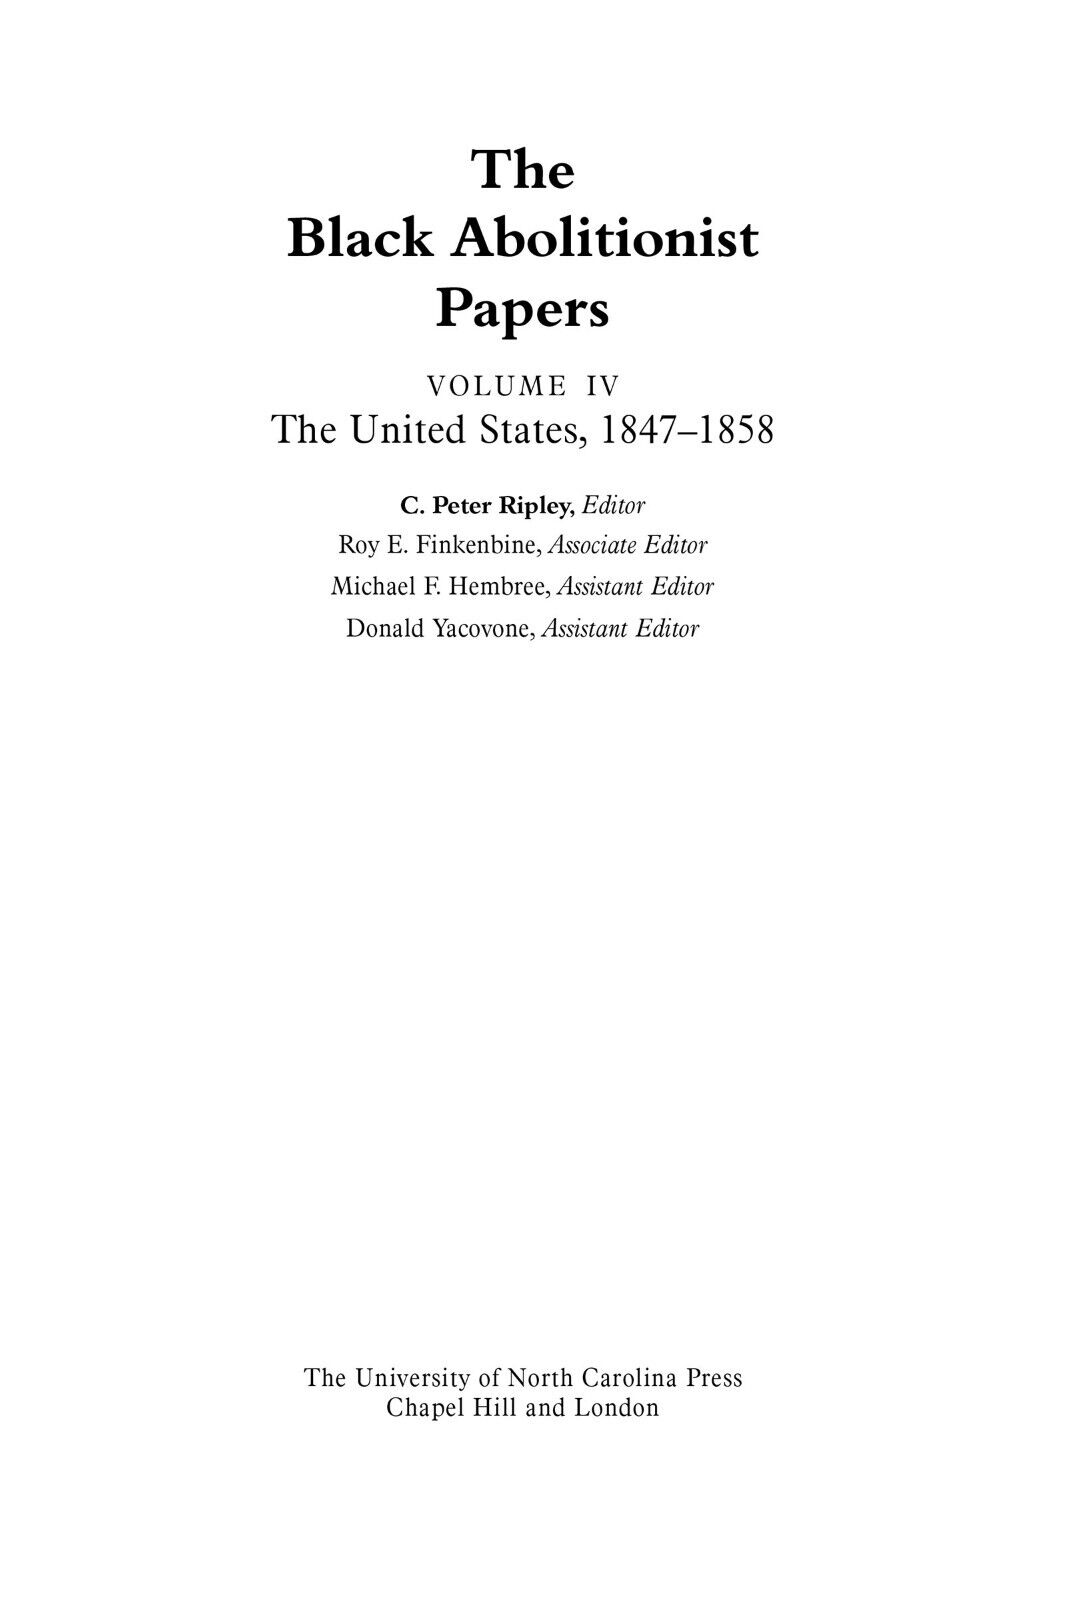 The Black Abolitionist Papers: Vol. IV - C. Peter Ripley  - 2015